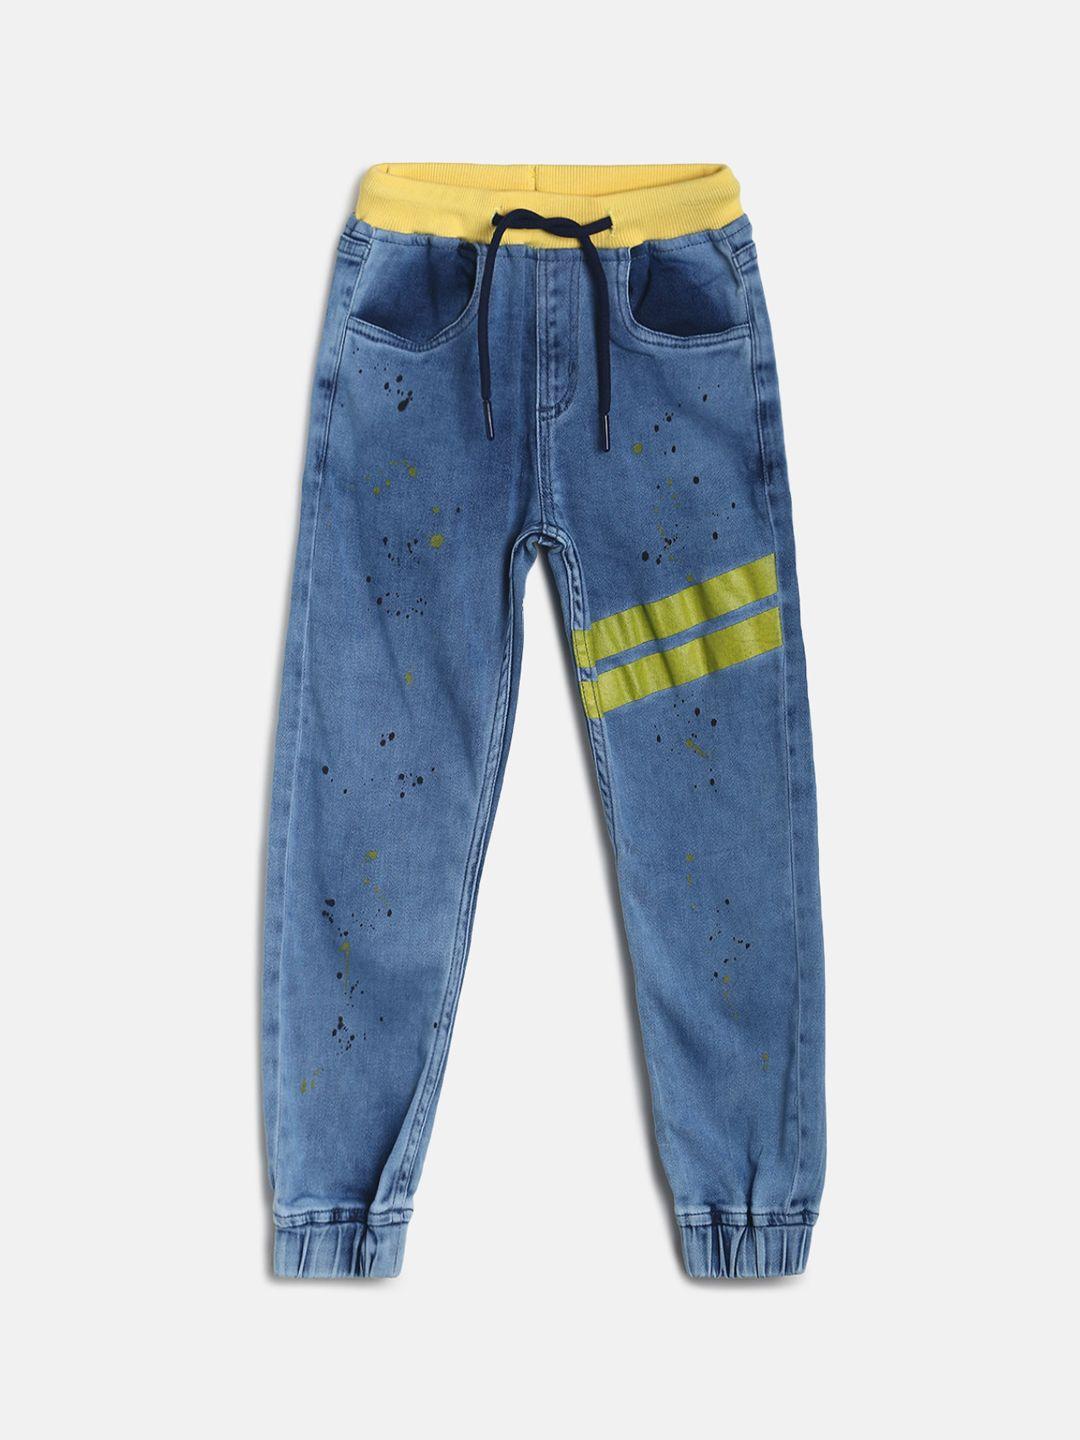 TALES & STORIES Boys Printed Slim Fit Joggers Trousers